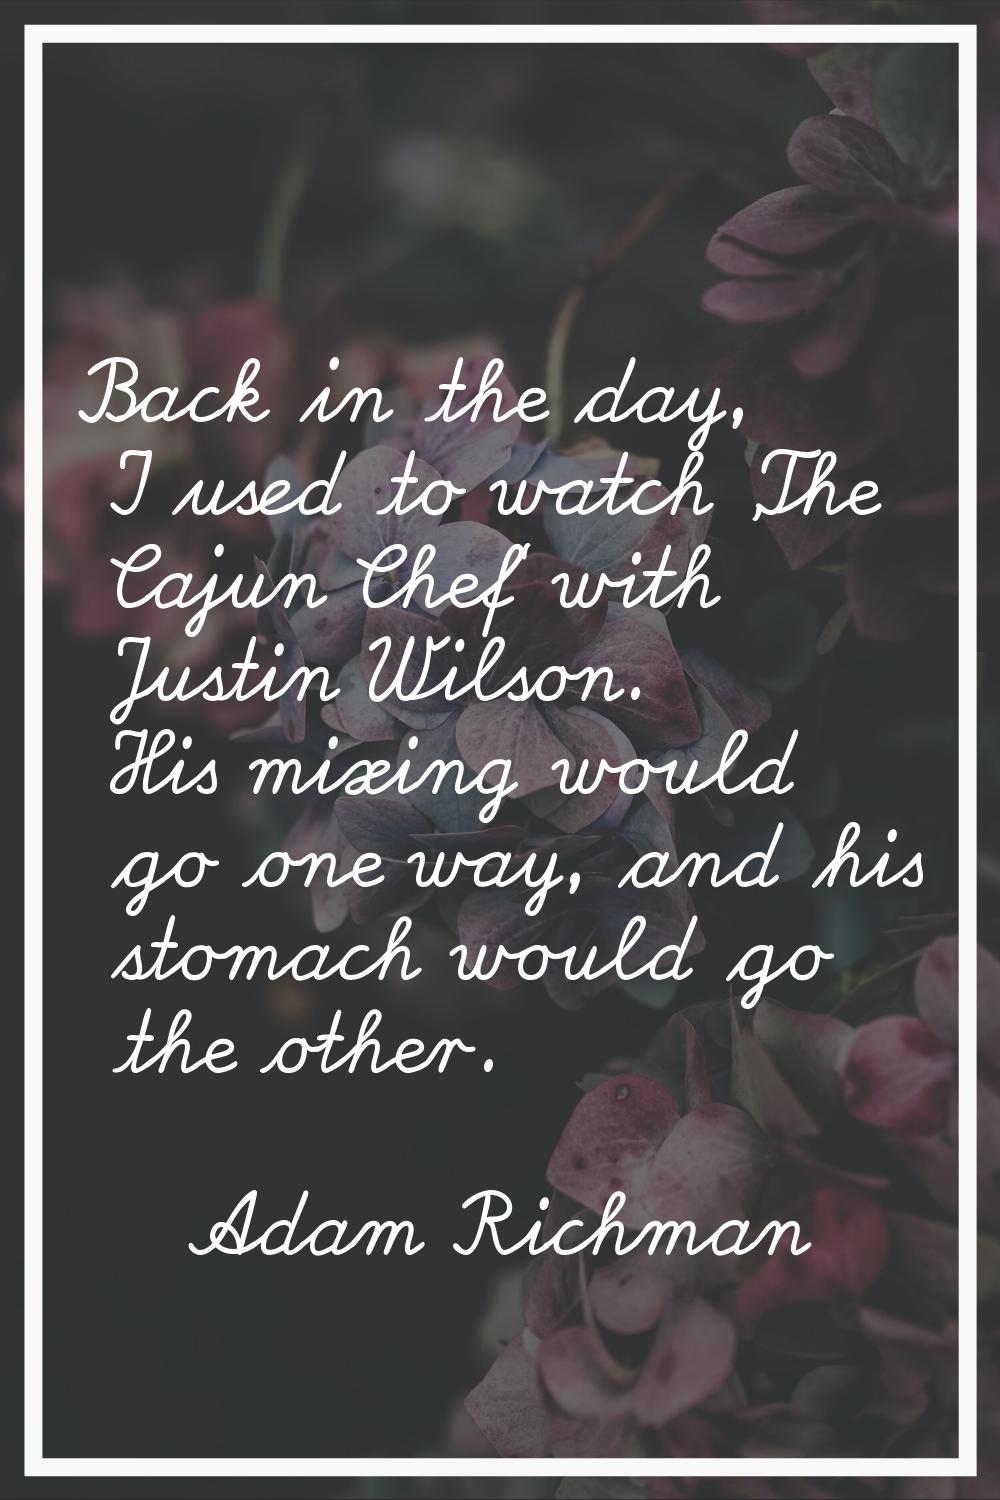 Back in the day, I used to watch 'The Cajun Chef' with Justin Wilson. His mixing would go one way, 